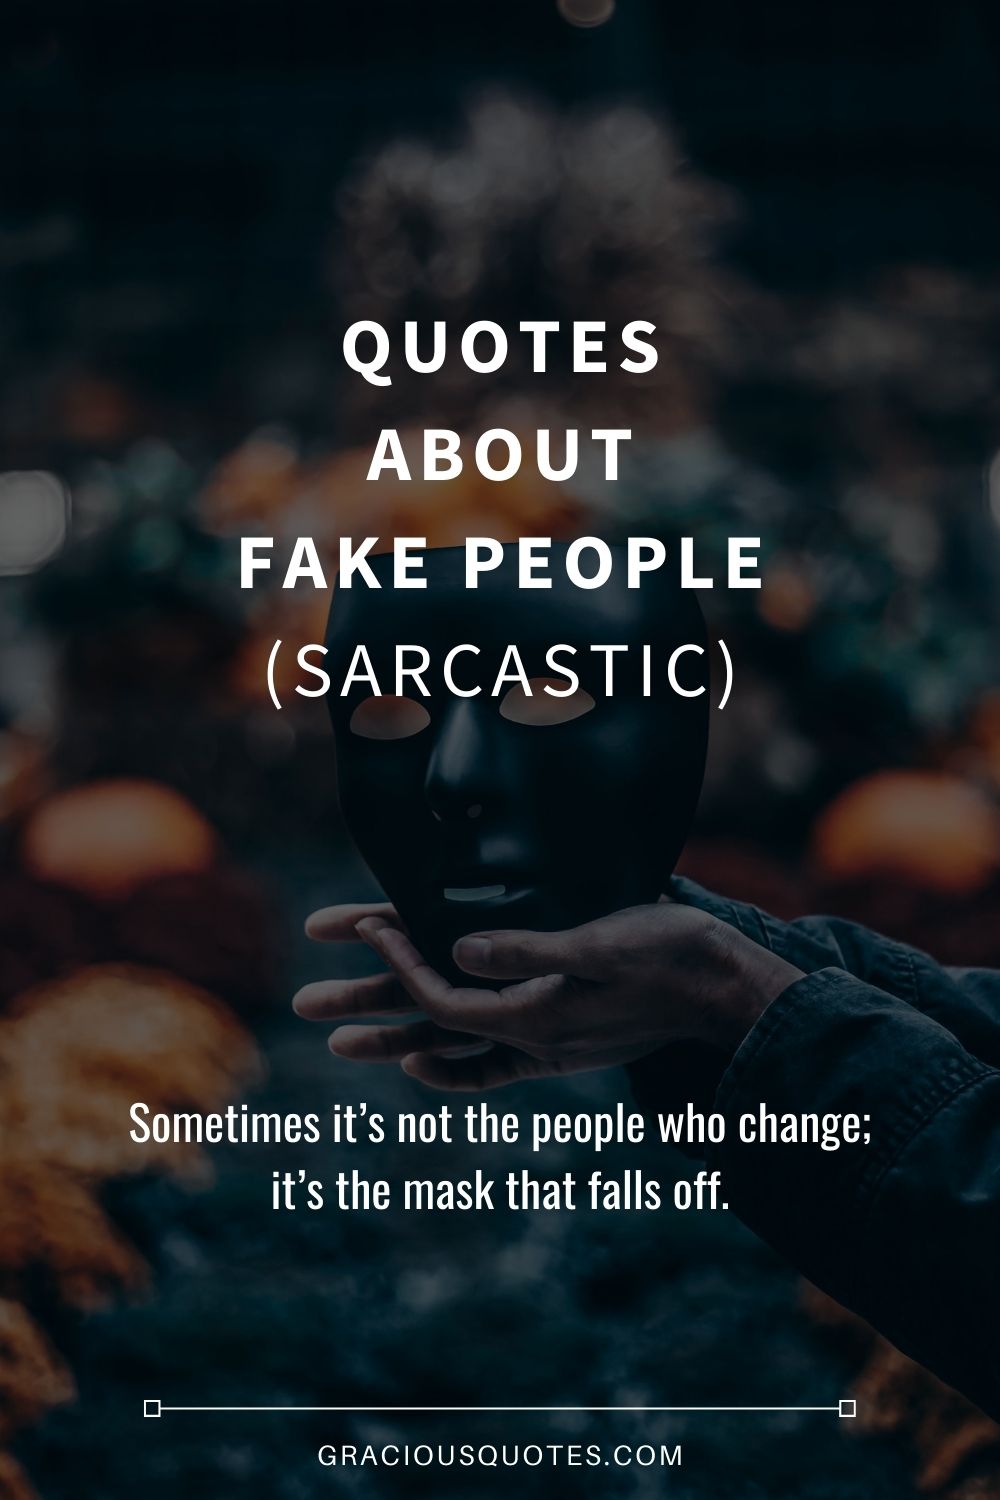 Quotes About Fake People (SARCASTIC) - Gracious Quotes